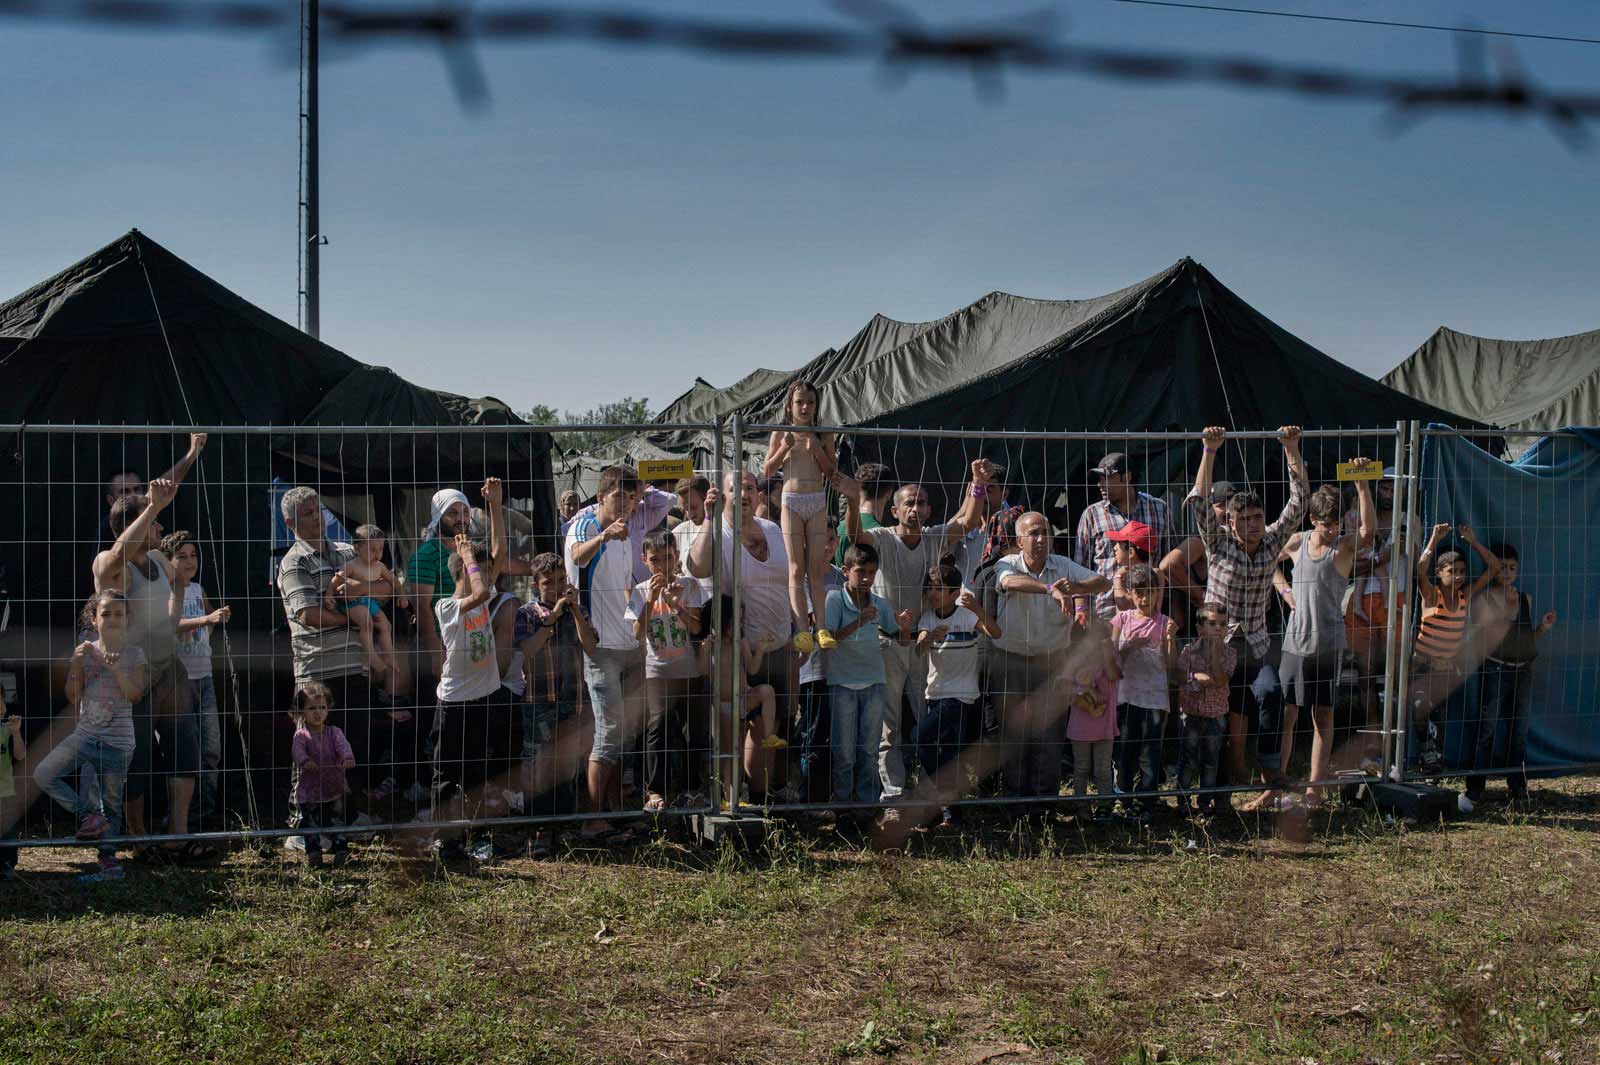 A group of migrants wait at a makeshift detention camp for Hungarian authorities in Roszke, Hungary, to register their arrival in the European Union. Aug. 29, 2015